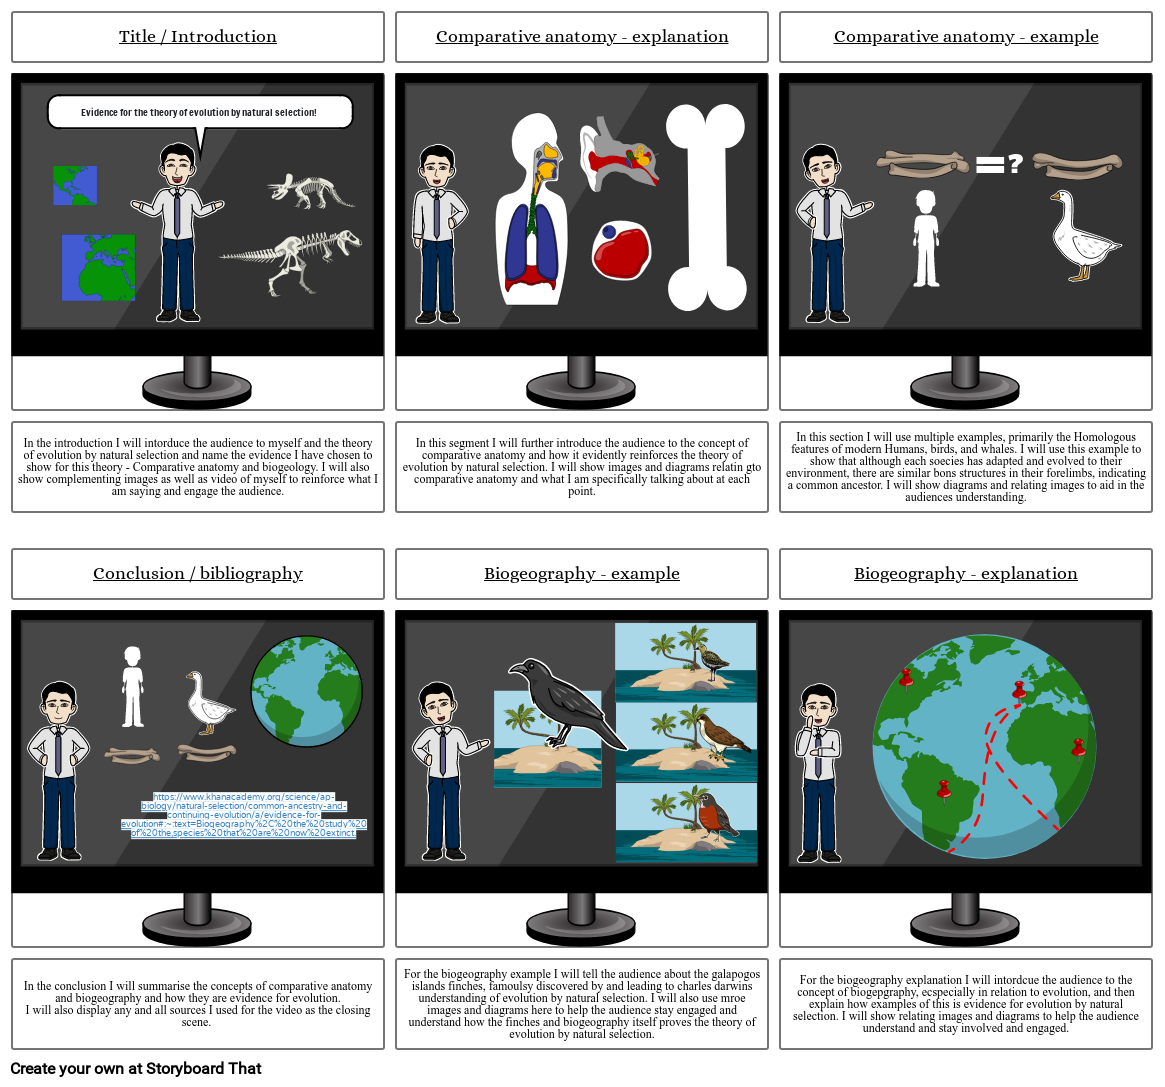 Evolution by natural selection storyboard